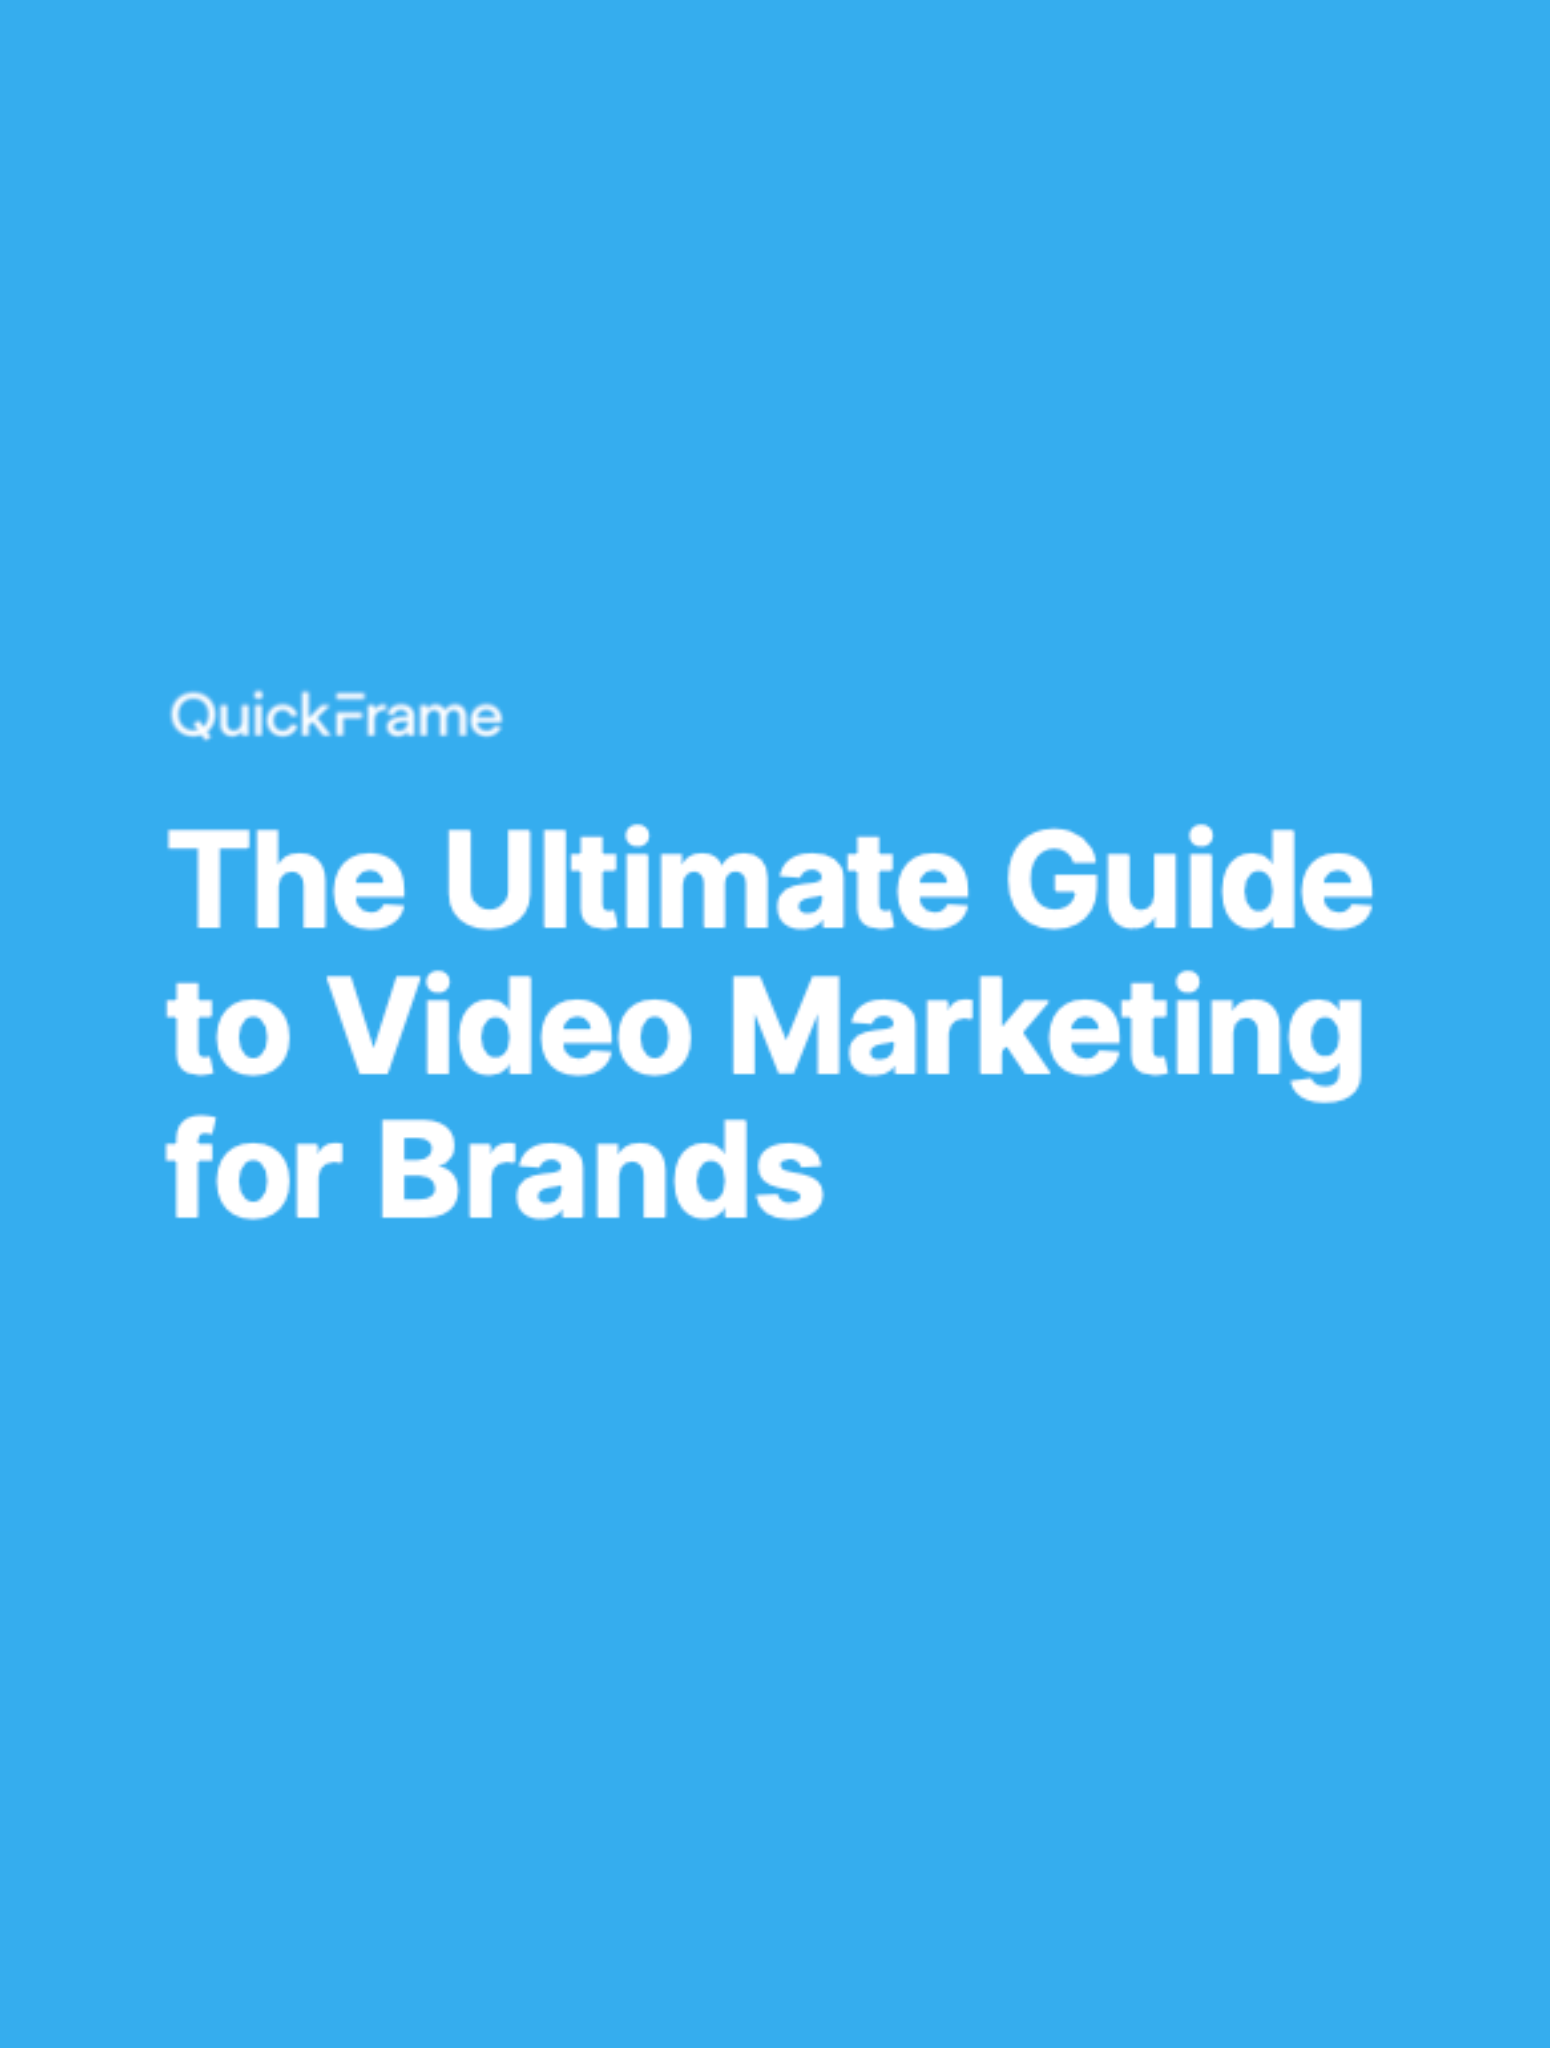 The Ultimate Guide to Video Marketing for Brands